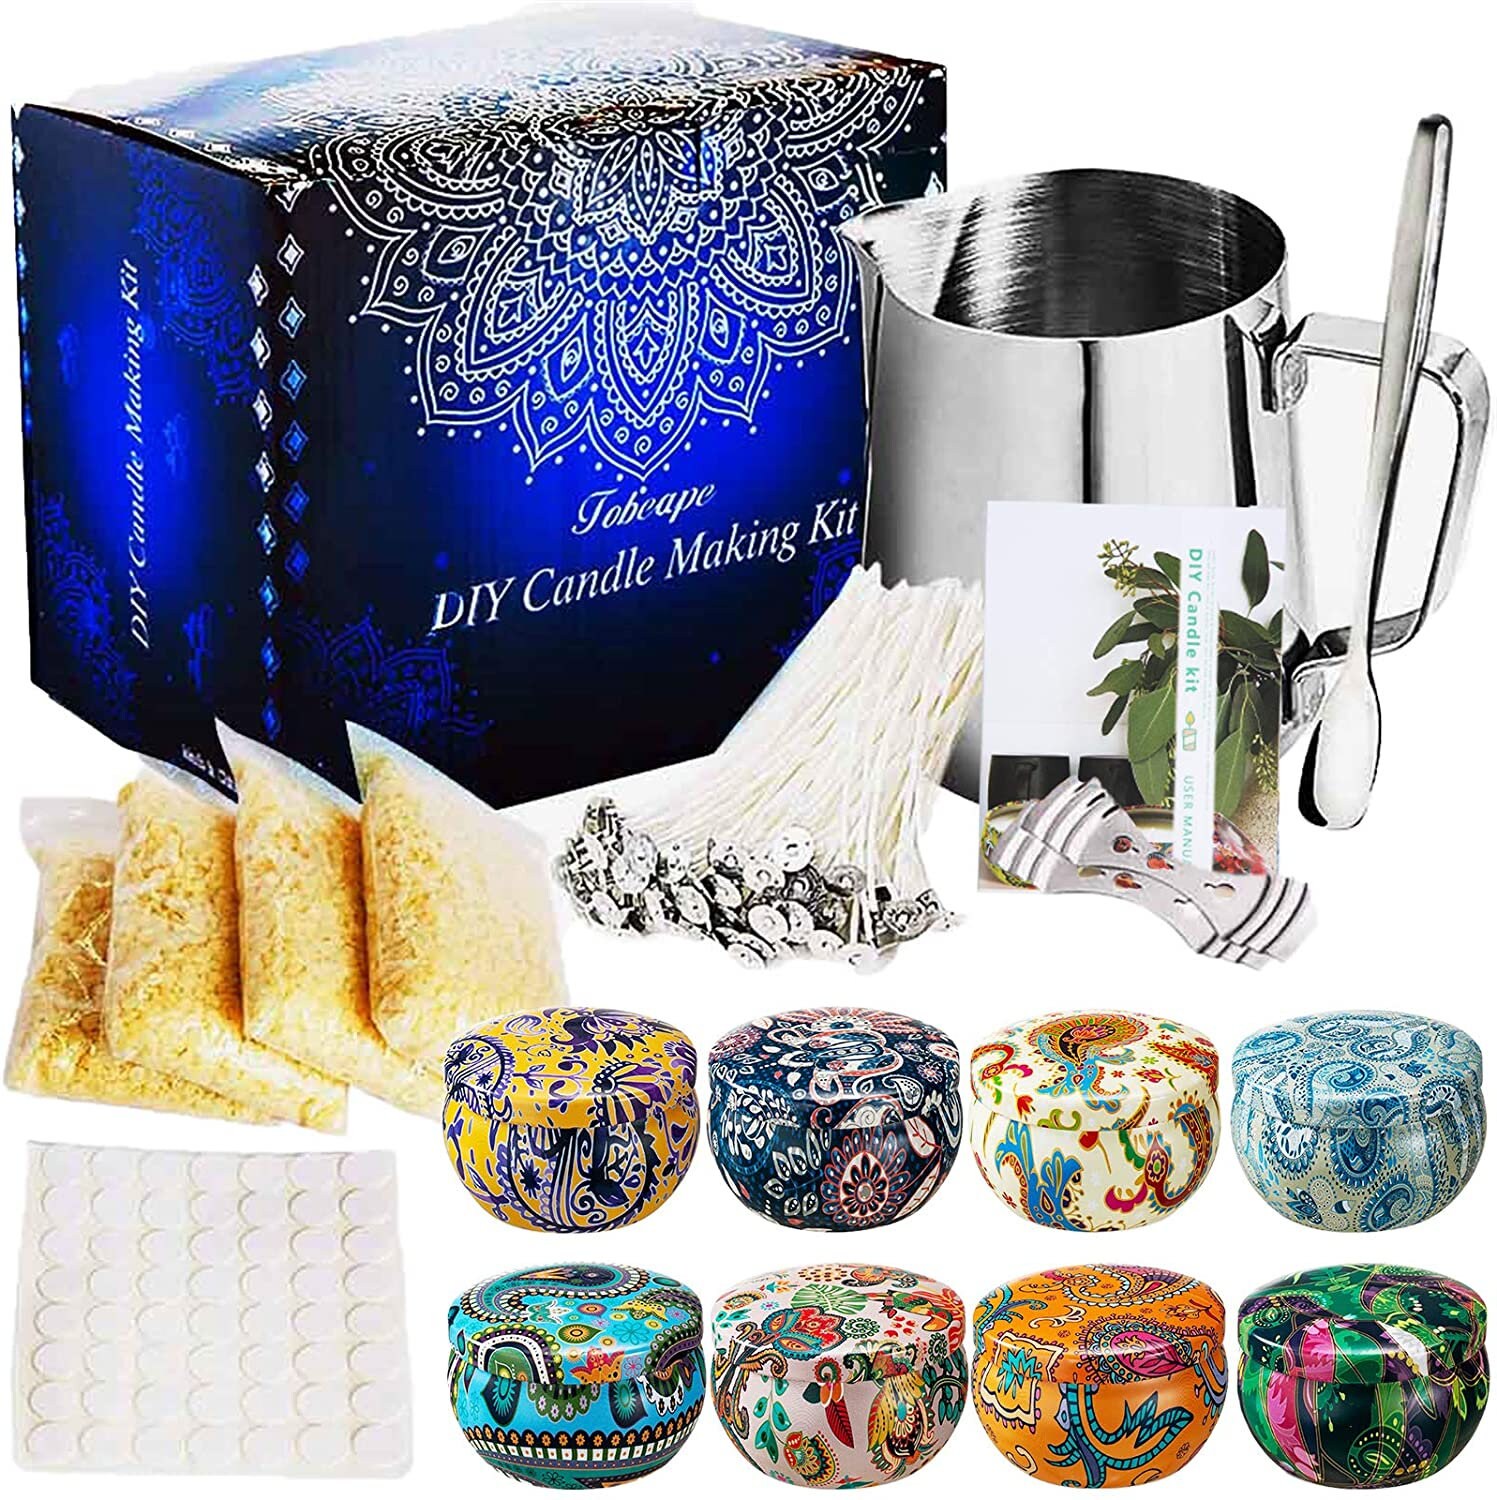 Candle Making Kit - Wax and Accessory DIY Set for The Making of Scented Candles